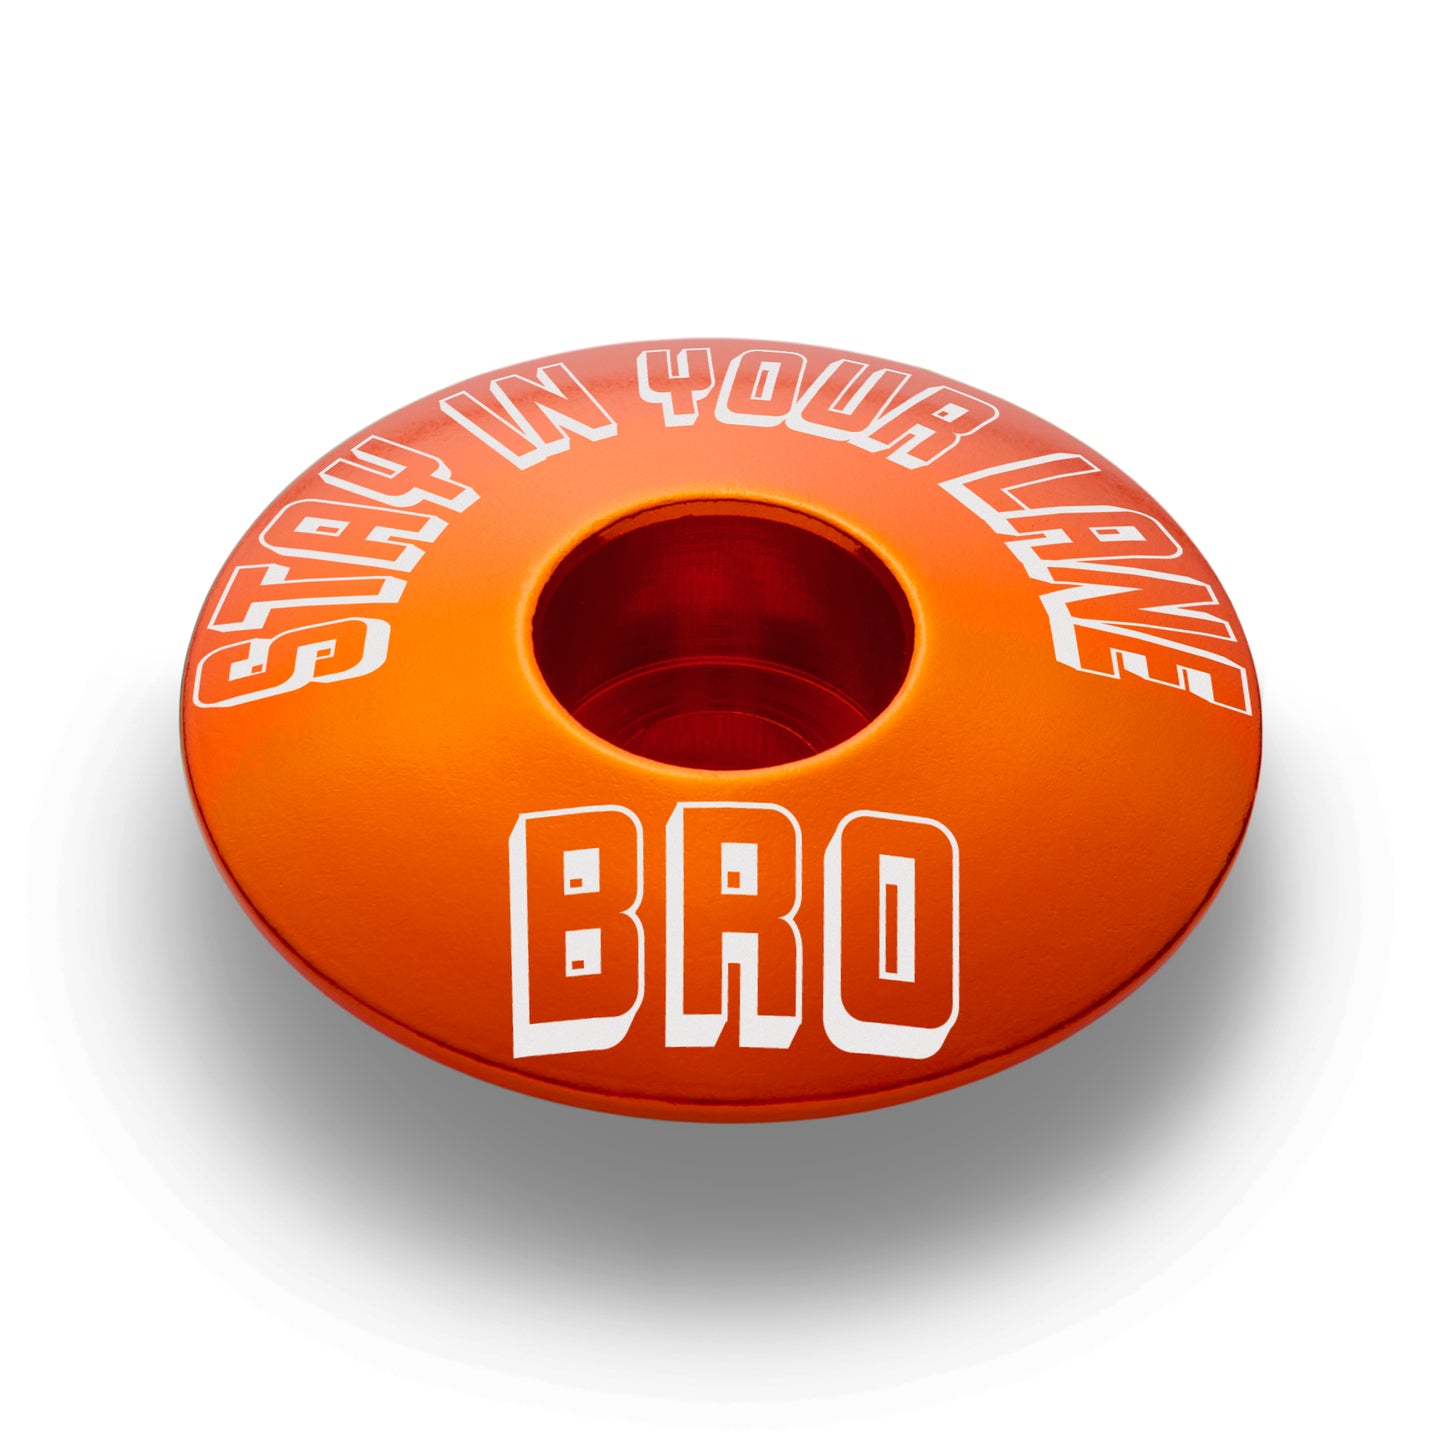 Stay In Your Lane, Bro - Bicycle Headset Cap